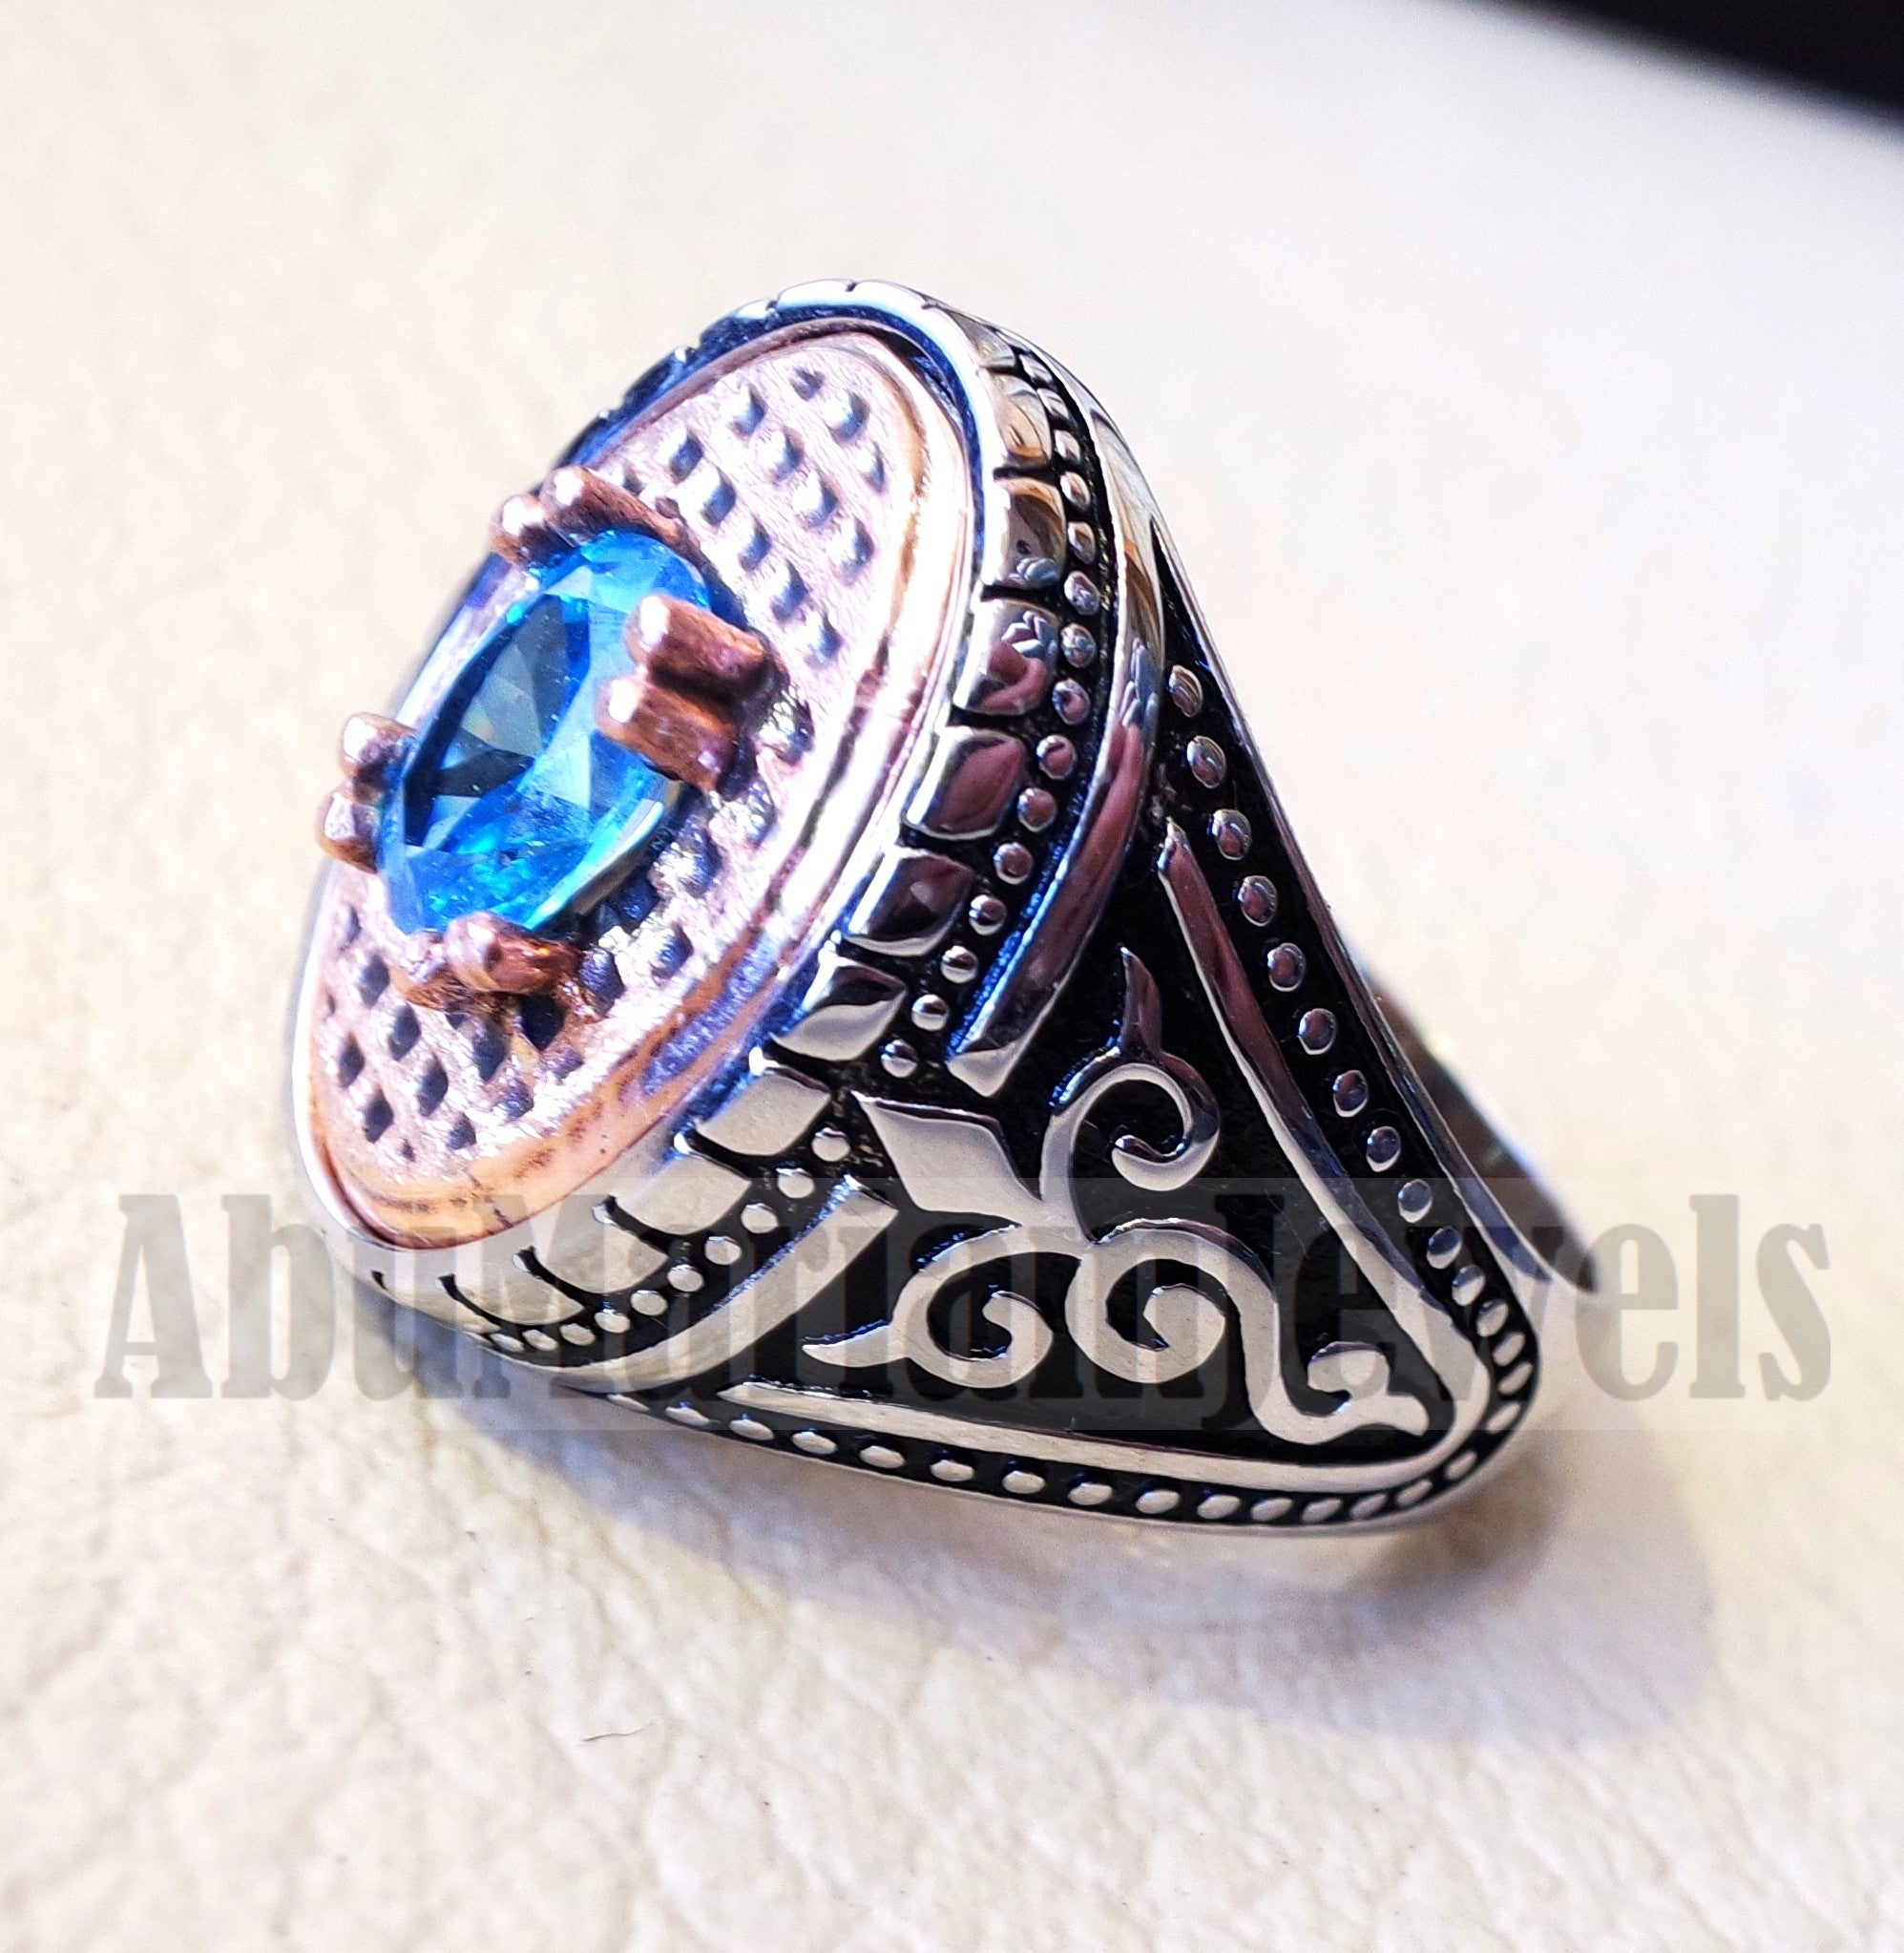 deep vivid sky blue cubic zirconia oval stone highest quality stone sterling silver 925 men ring and bronze frame all sizes jewelry Br102